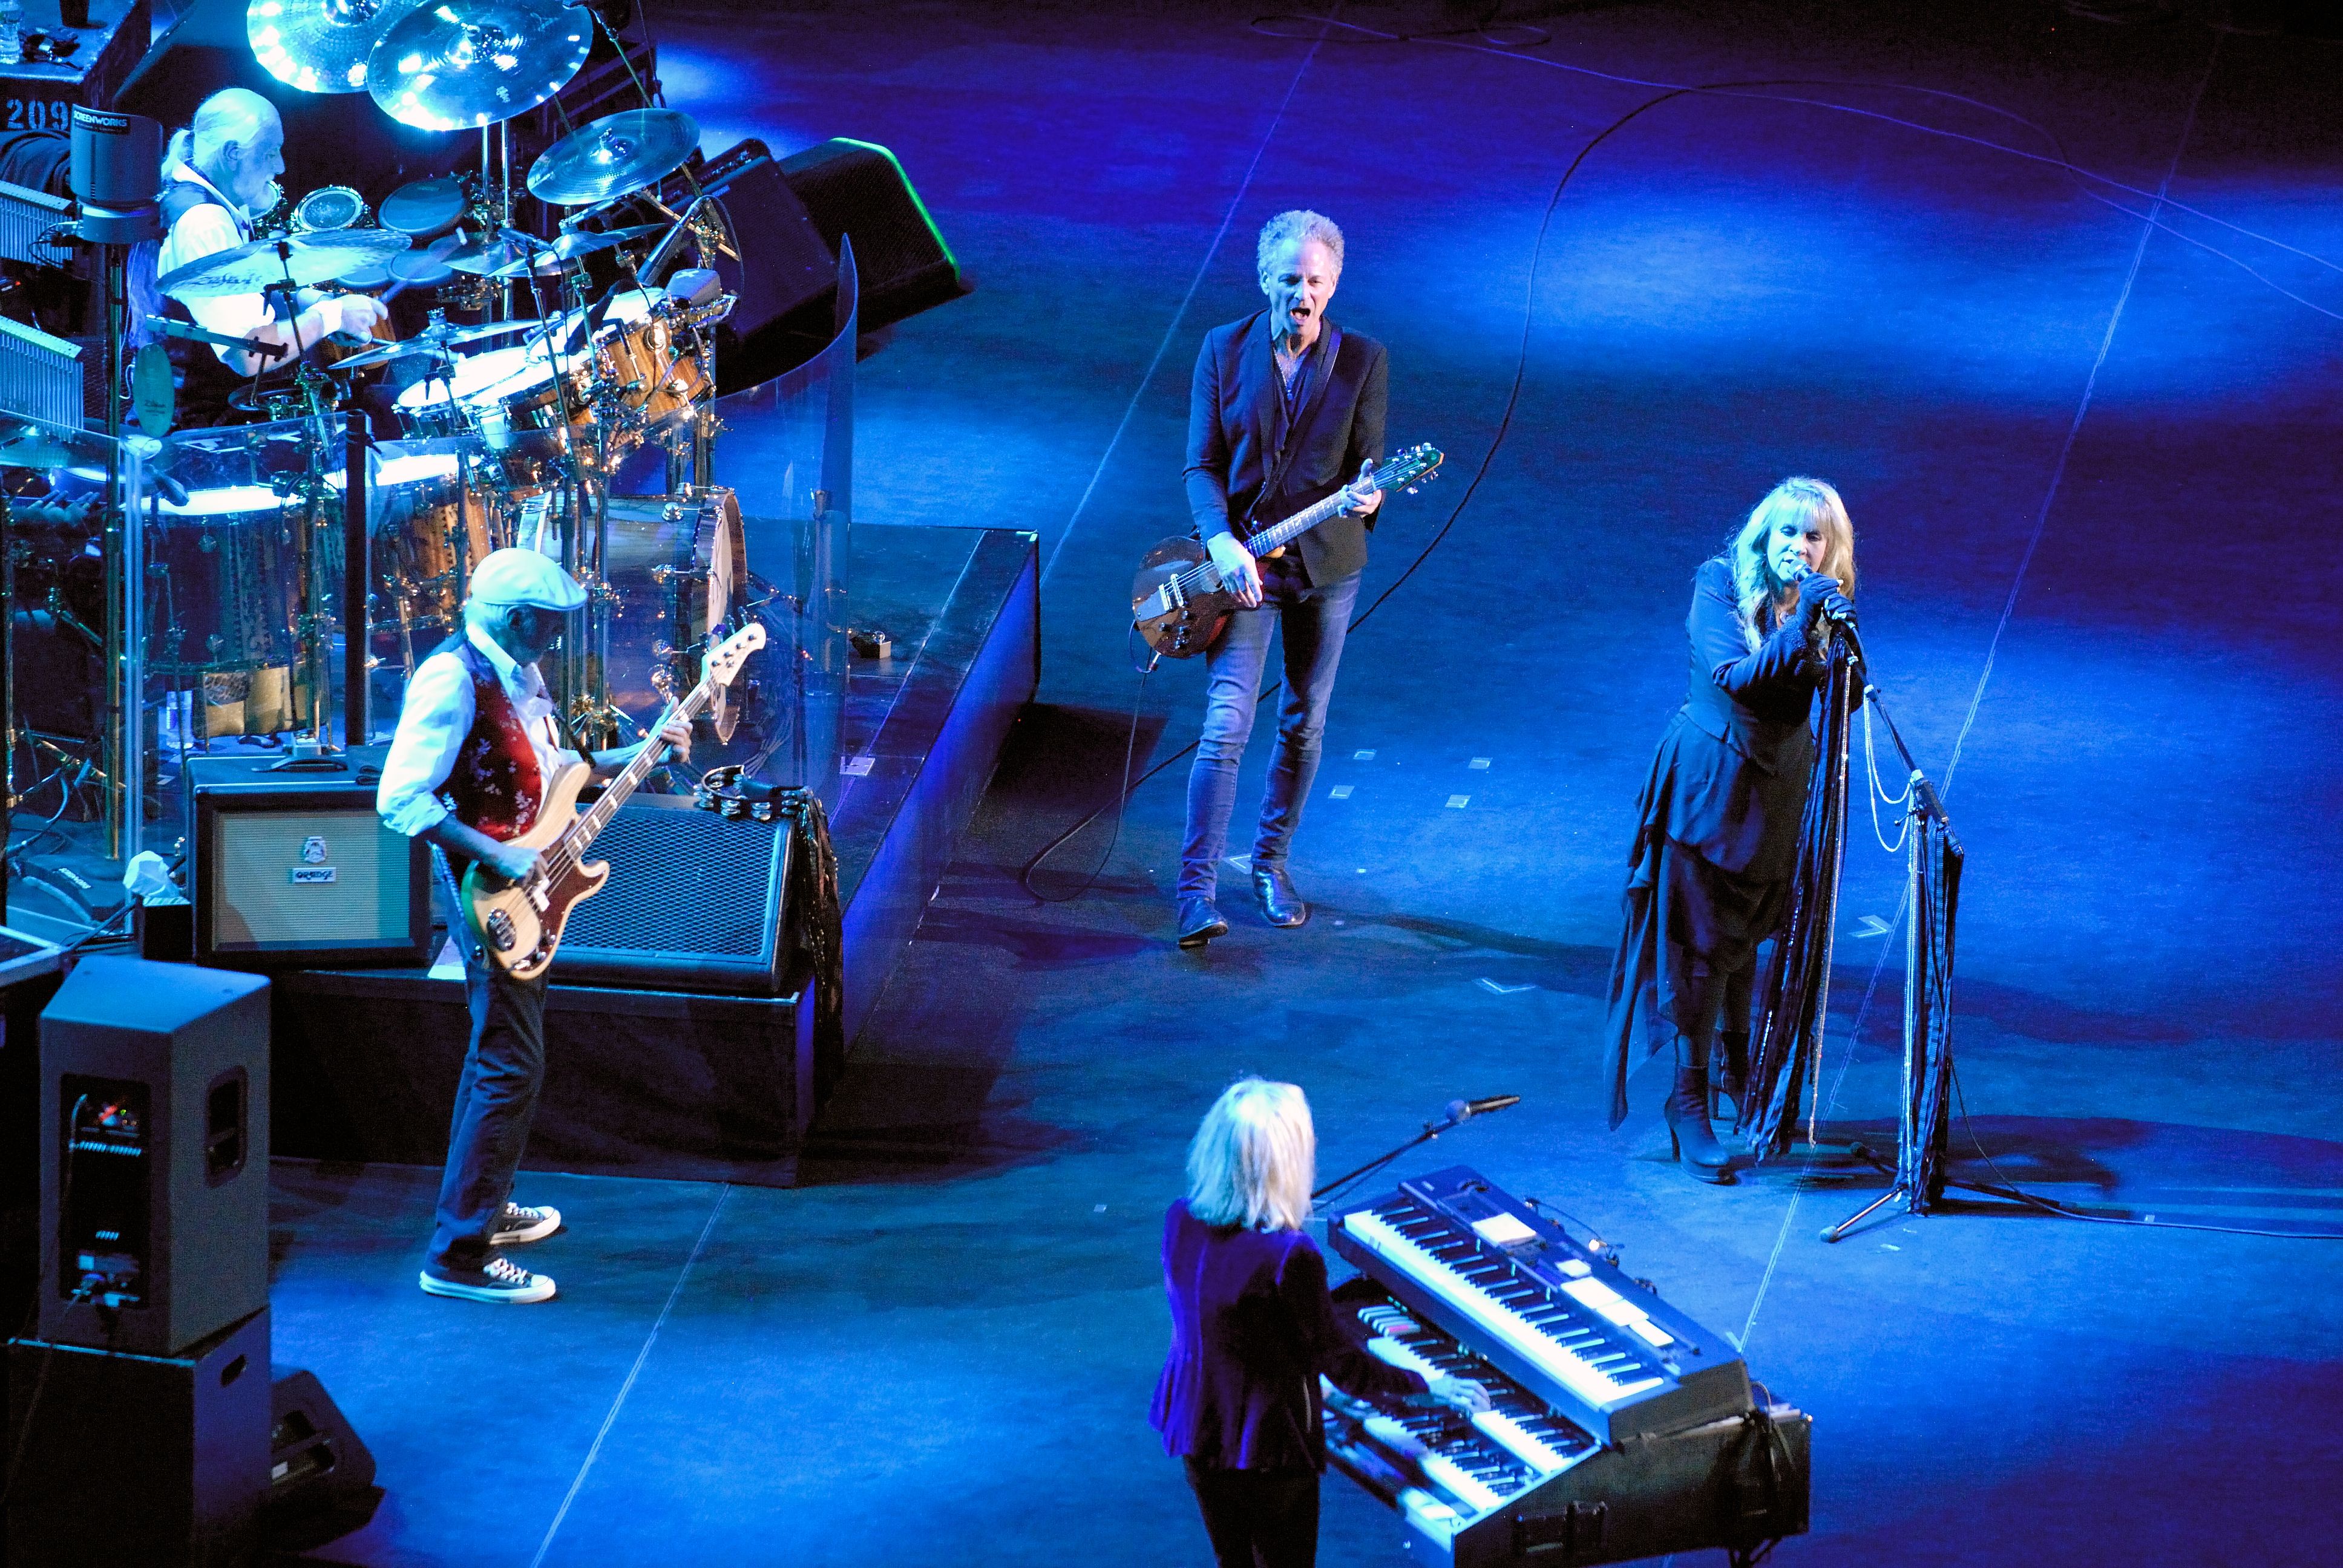 after losing yet another band member, fleetwood mac has no plans to perform again